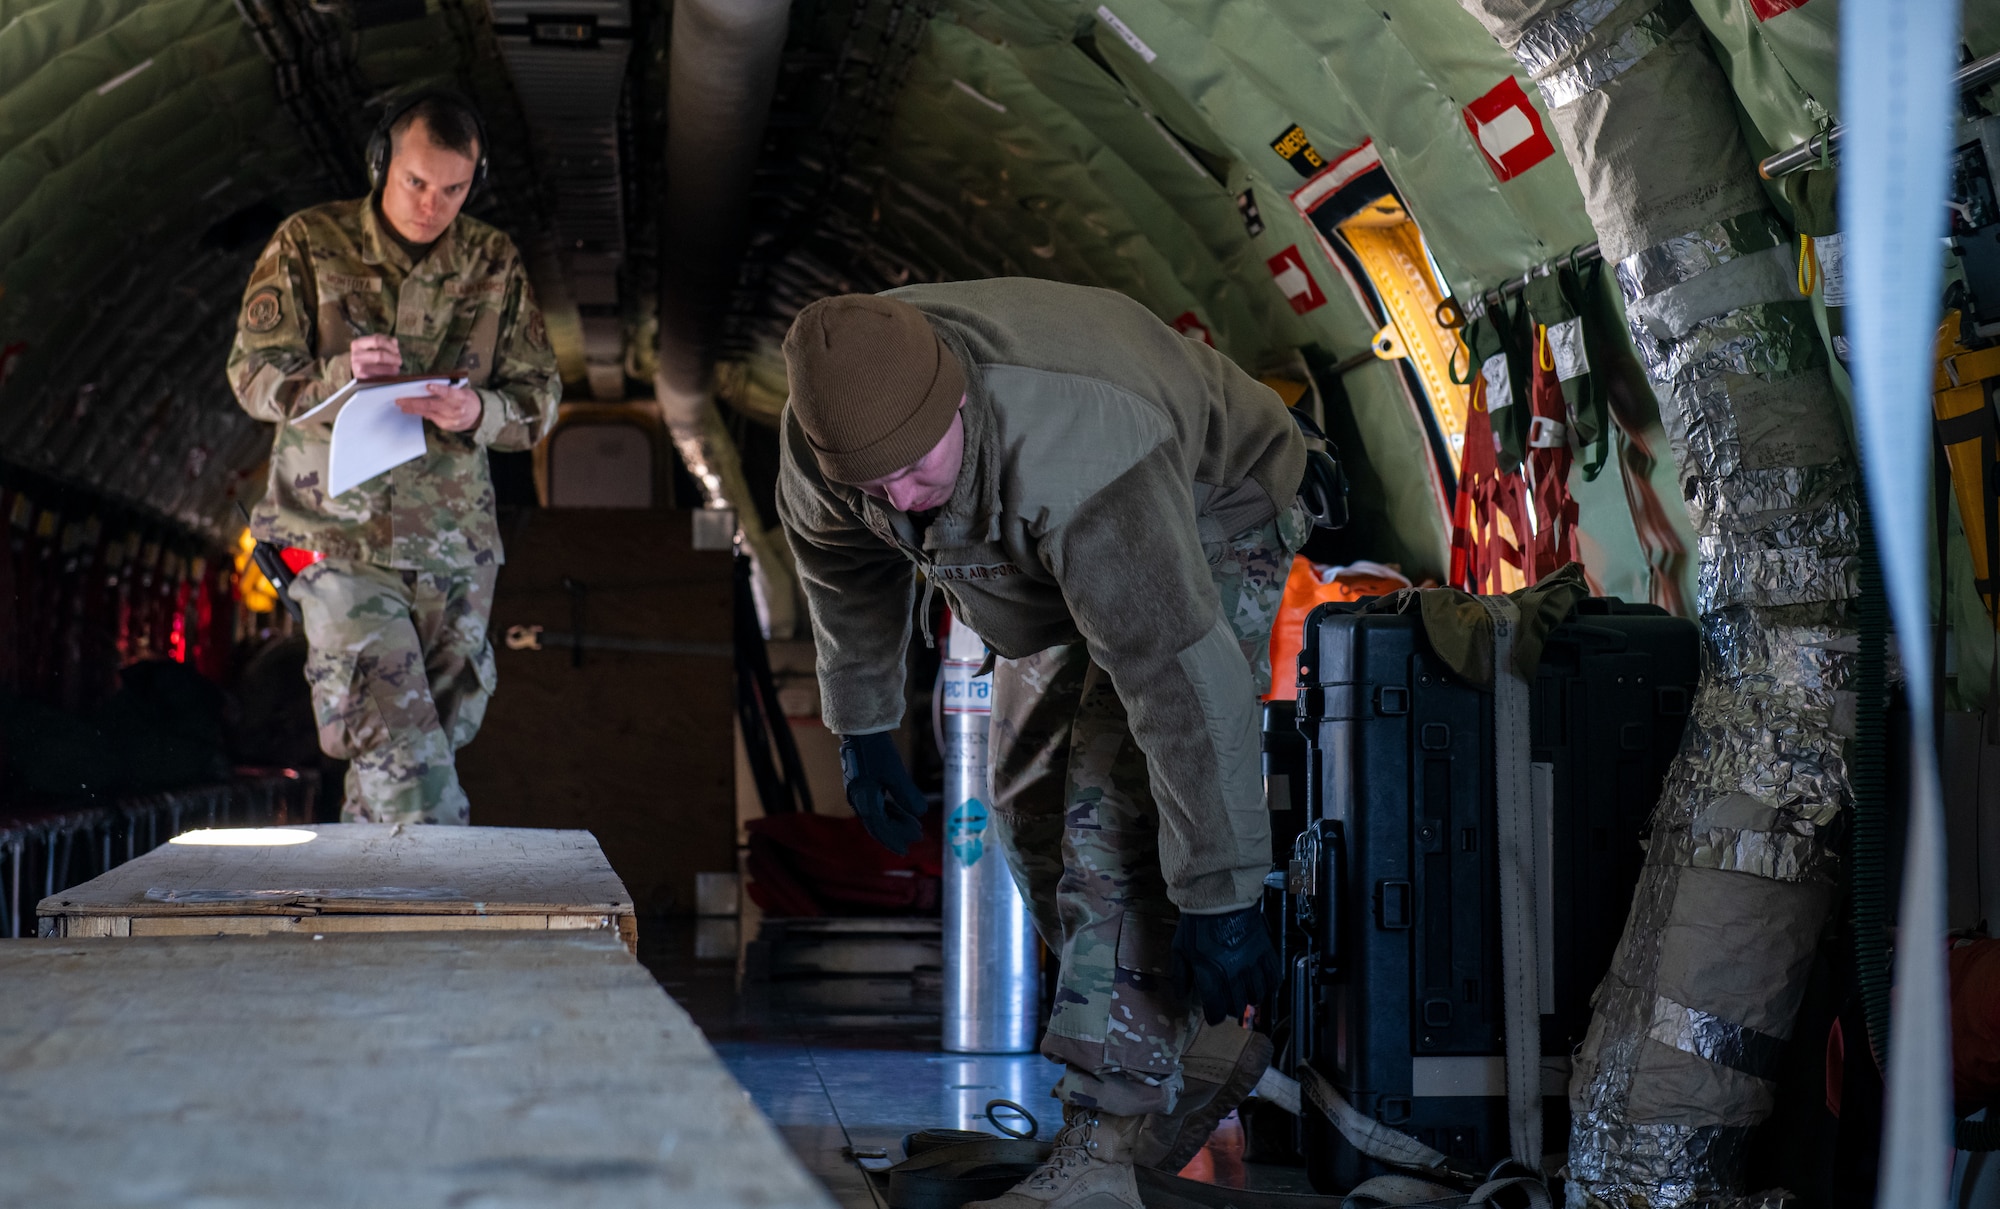 U.S. Air Force Master Sgt. Chris Montoya, ramp training manager with the 67th Aerial Port Squadron, jots down notes as he oversees a cargo training exercise Feb. 5, 2022 at Hill Air Force Base, Utah